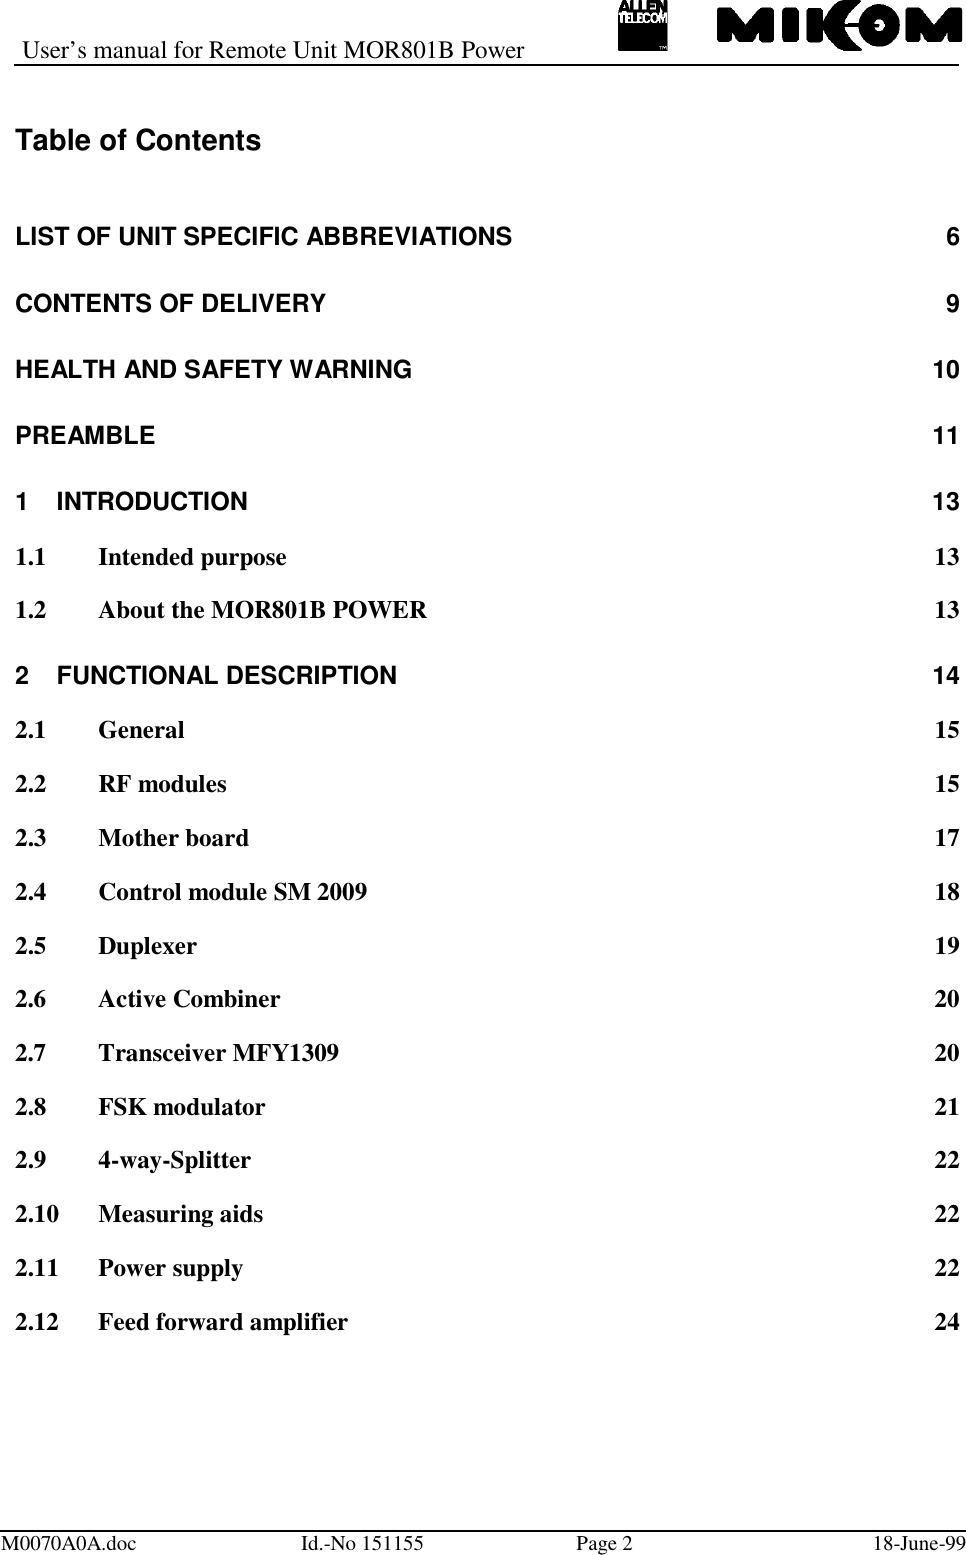 User’s manual for Remote Unit MOR801B PowerM0070A0A.doc Id.-No 151155 Page 2 18-June-99Table of ContentsLIST OF UNIT SPECIFIC ABBREVIATIONS 6CONTENTS OF DELIVERY 9HEALTH AND SAFETY WARNING  10PREAMBLE 111 INTRODUCTION 131.1 Intended purpose 131.2 About the MOR801B POWER 132 FUNCTIONAL DESCRIPTION 142.1 General 152.2 RF modules 152.3 Mother board 172.4 Control module SM 2009 182.5 Duplexer 192.6 Active Combiner 202.7 Transceiver MFY1309 202.8 FSK modulator 212.9 4-way-Splitter 222.10 Measuring aids 222.11 Power supply 222.12 Feed forward amplifier 24